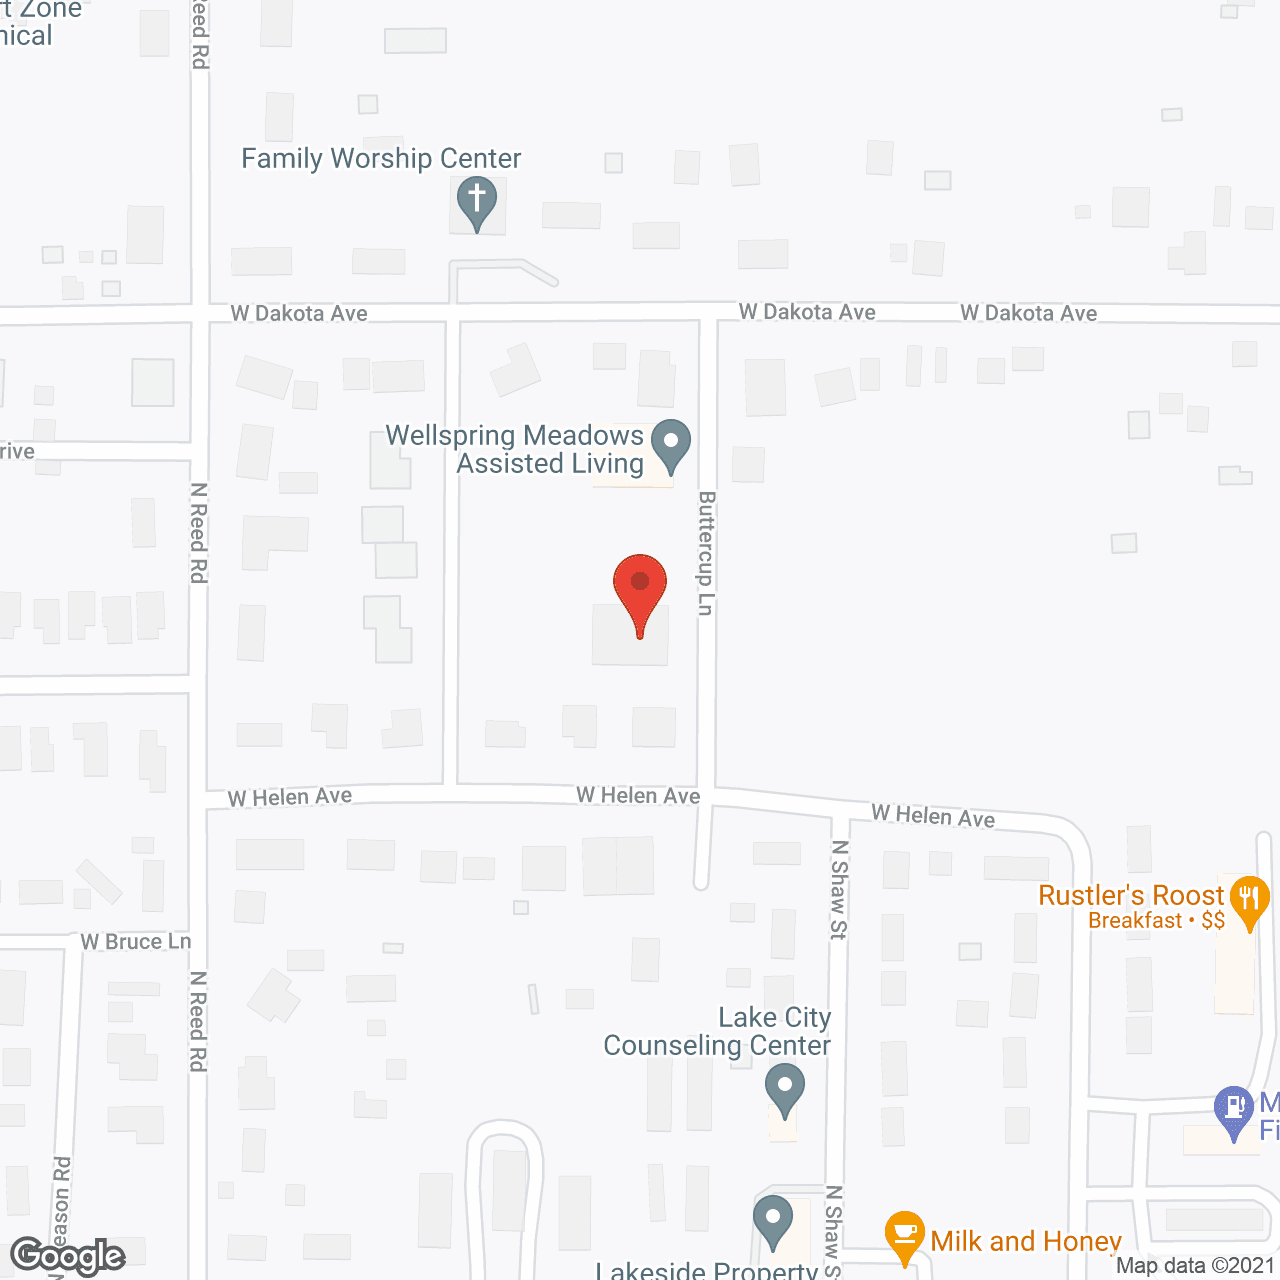 Wellspring Meadows Assisted Living in google map